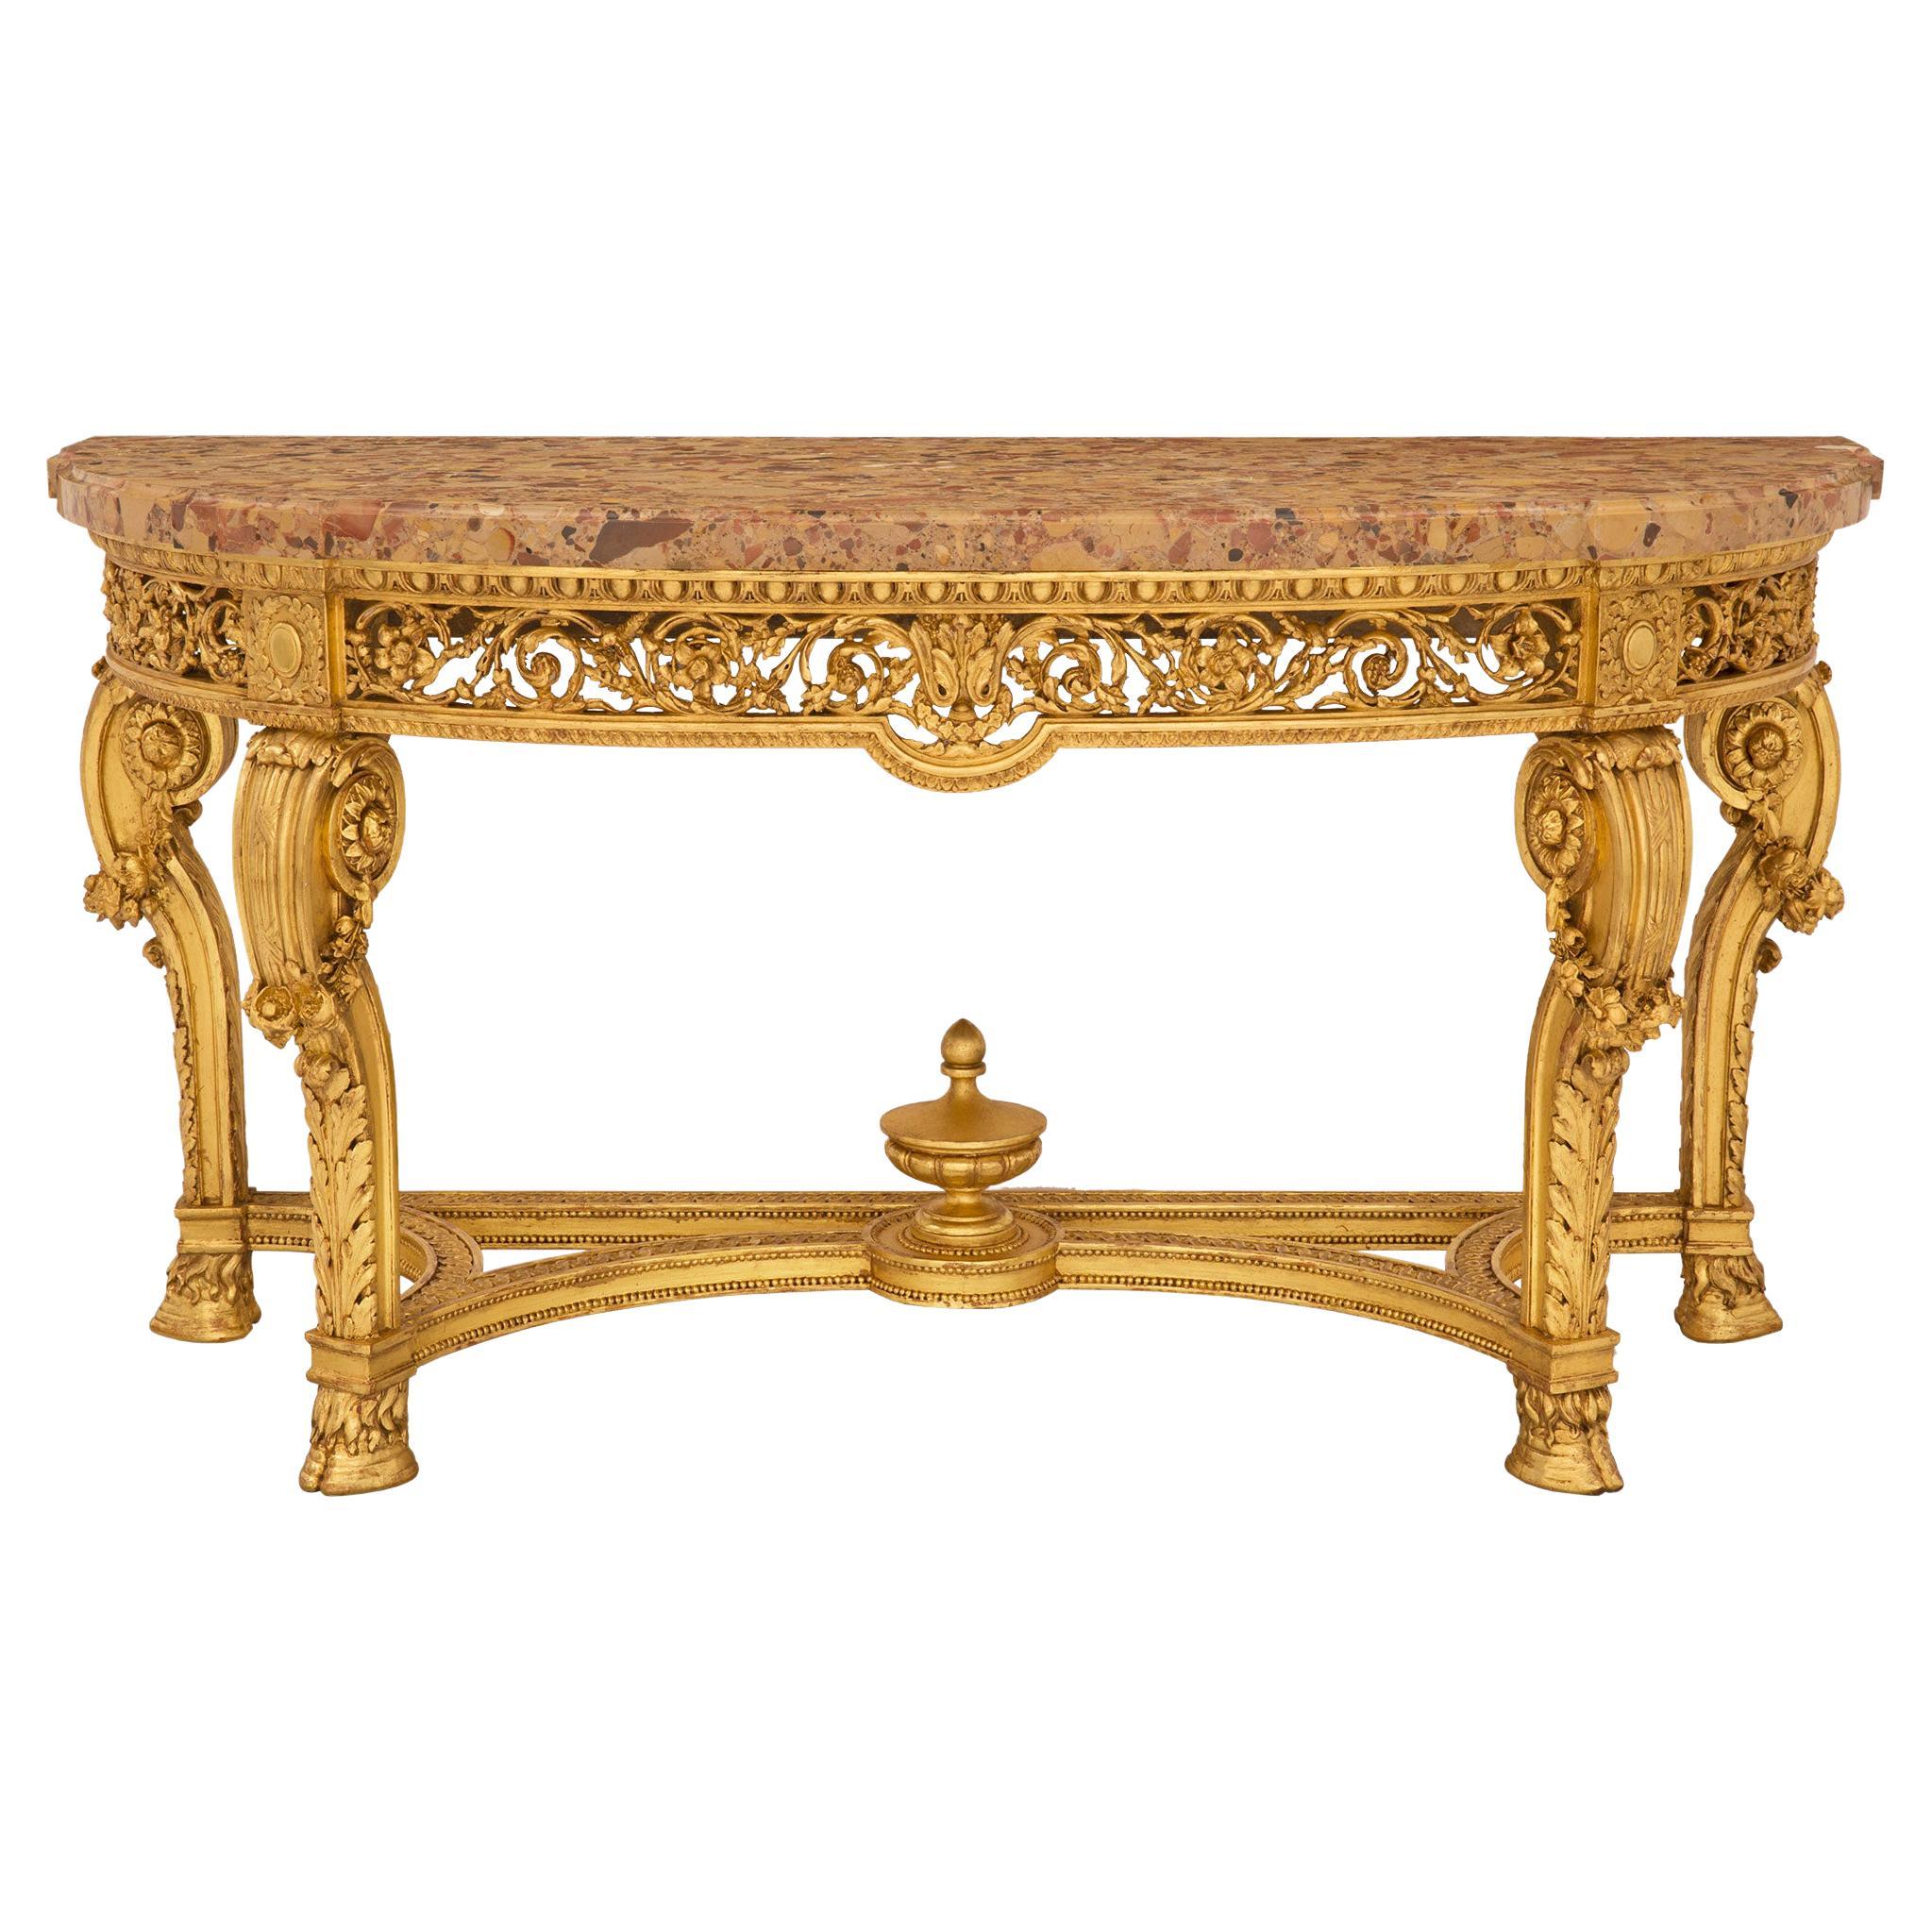 French 19th Century Louis XVI Style Giltwood and Brèche D’Alep Marble Console